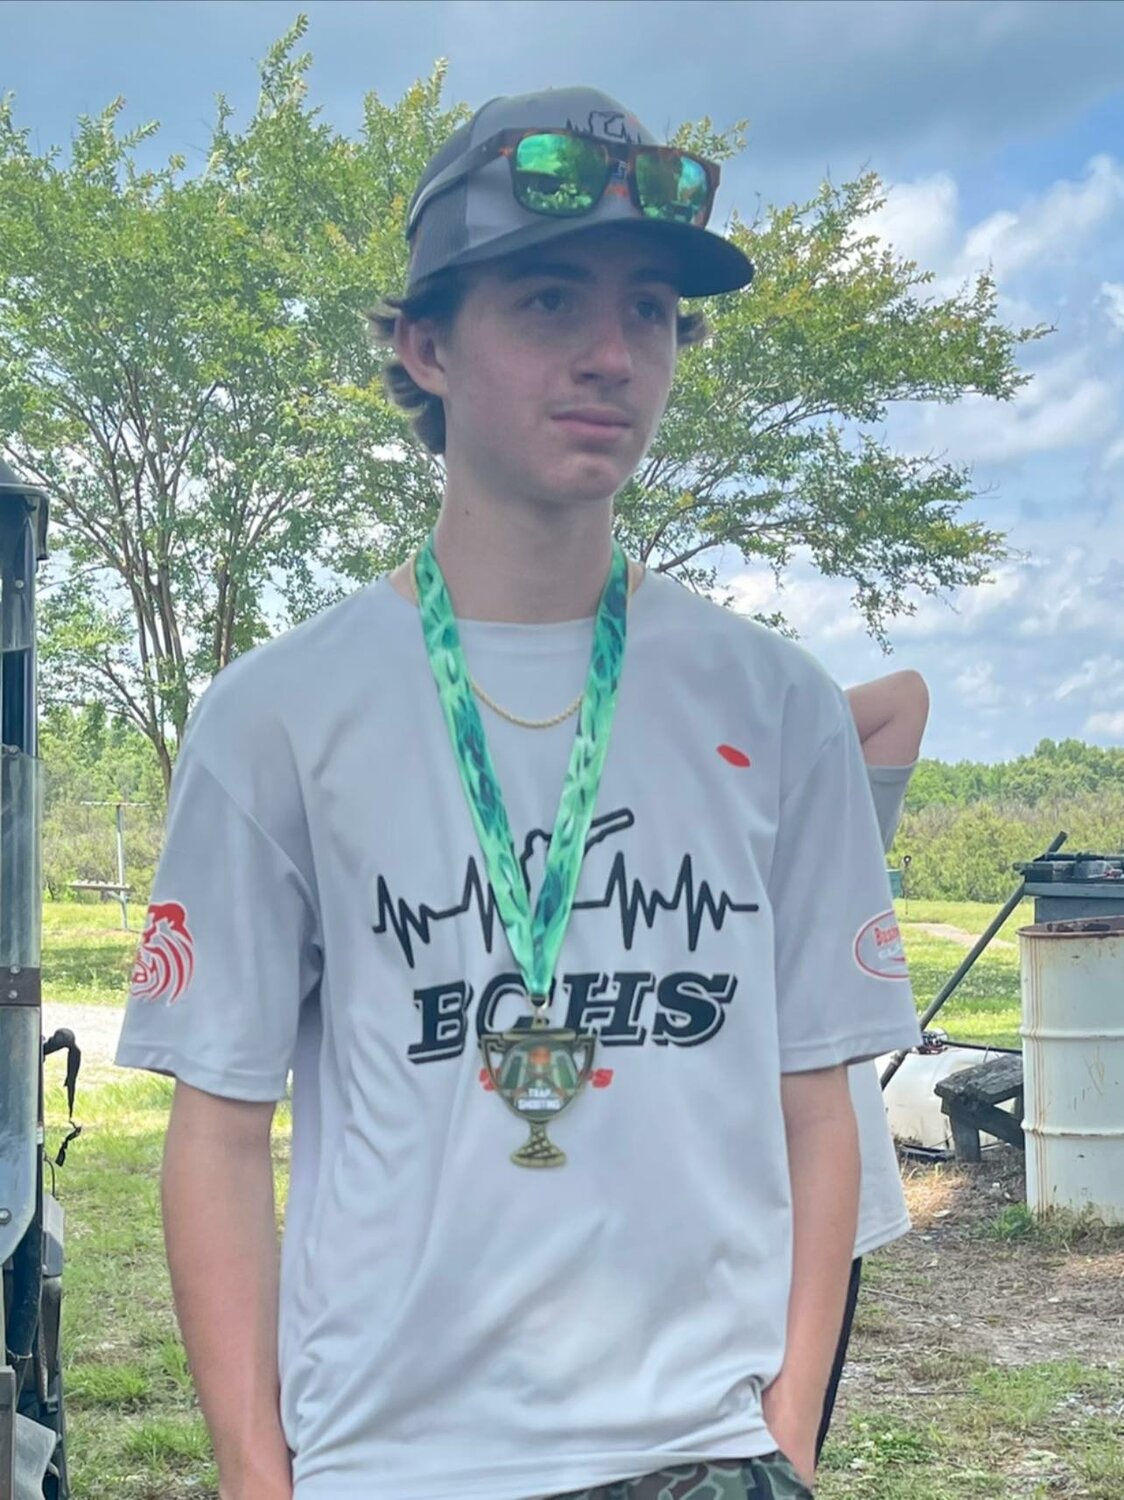 Laine Hicks took home second place from the Trap Shoot Finals at Dixie Trap & Gun Club in Matthews where he competed alongside his teammates with the Baldwin County High School Sporting Clays team.